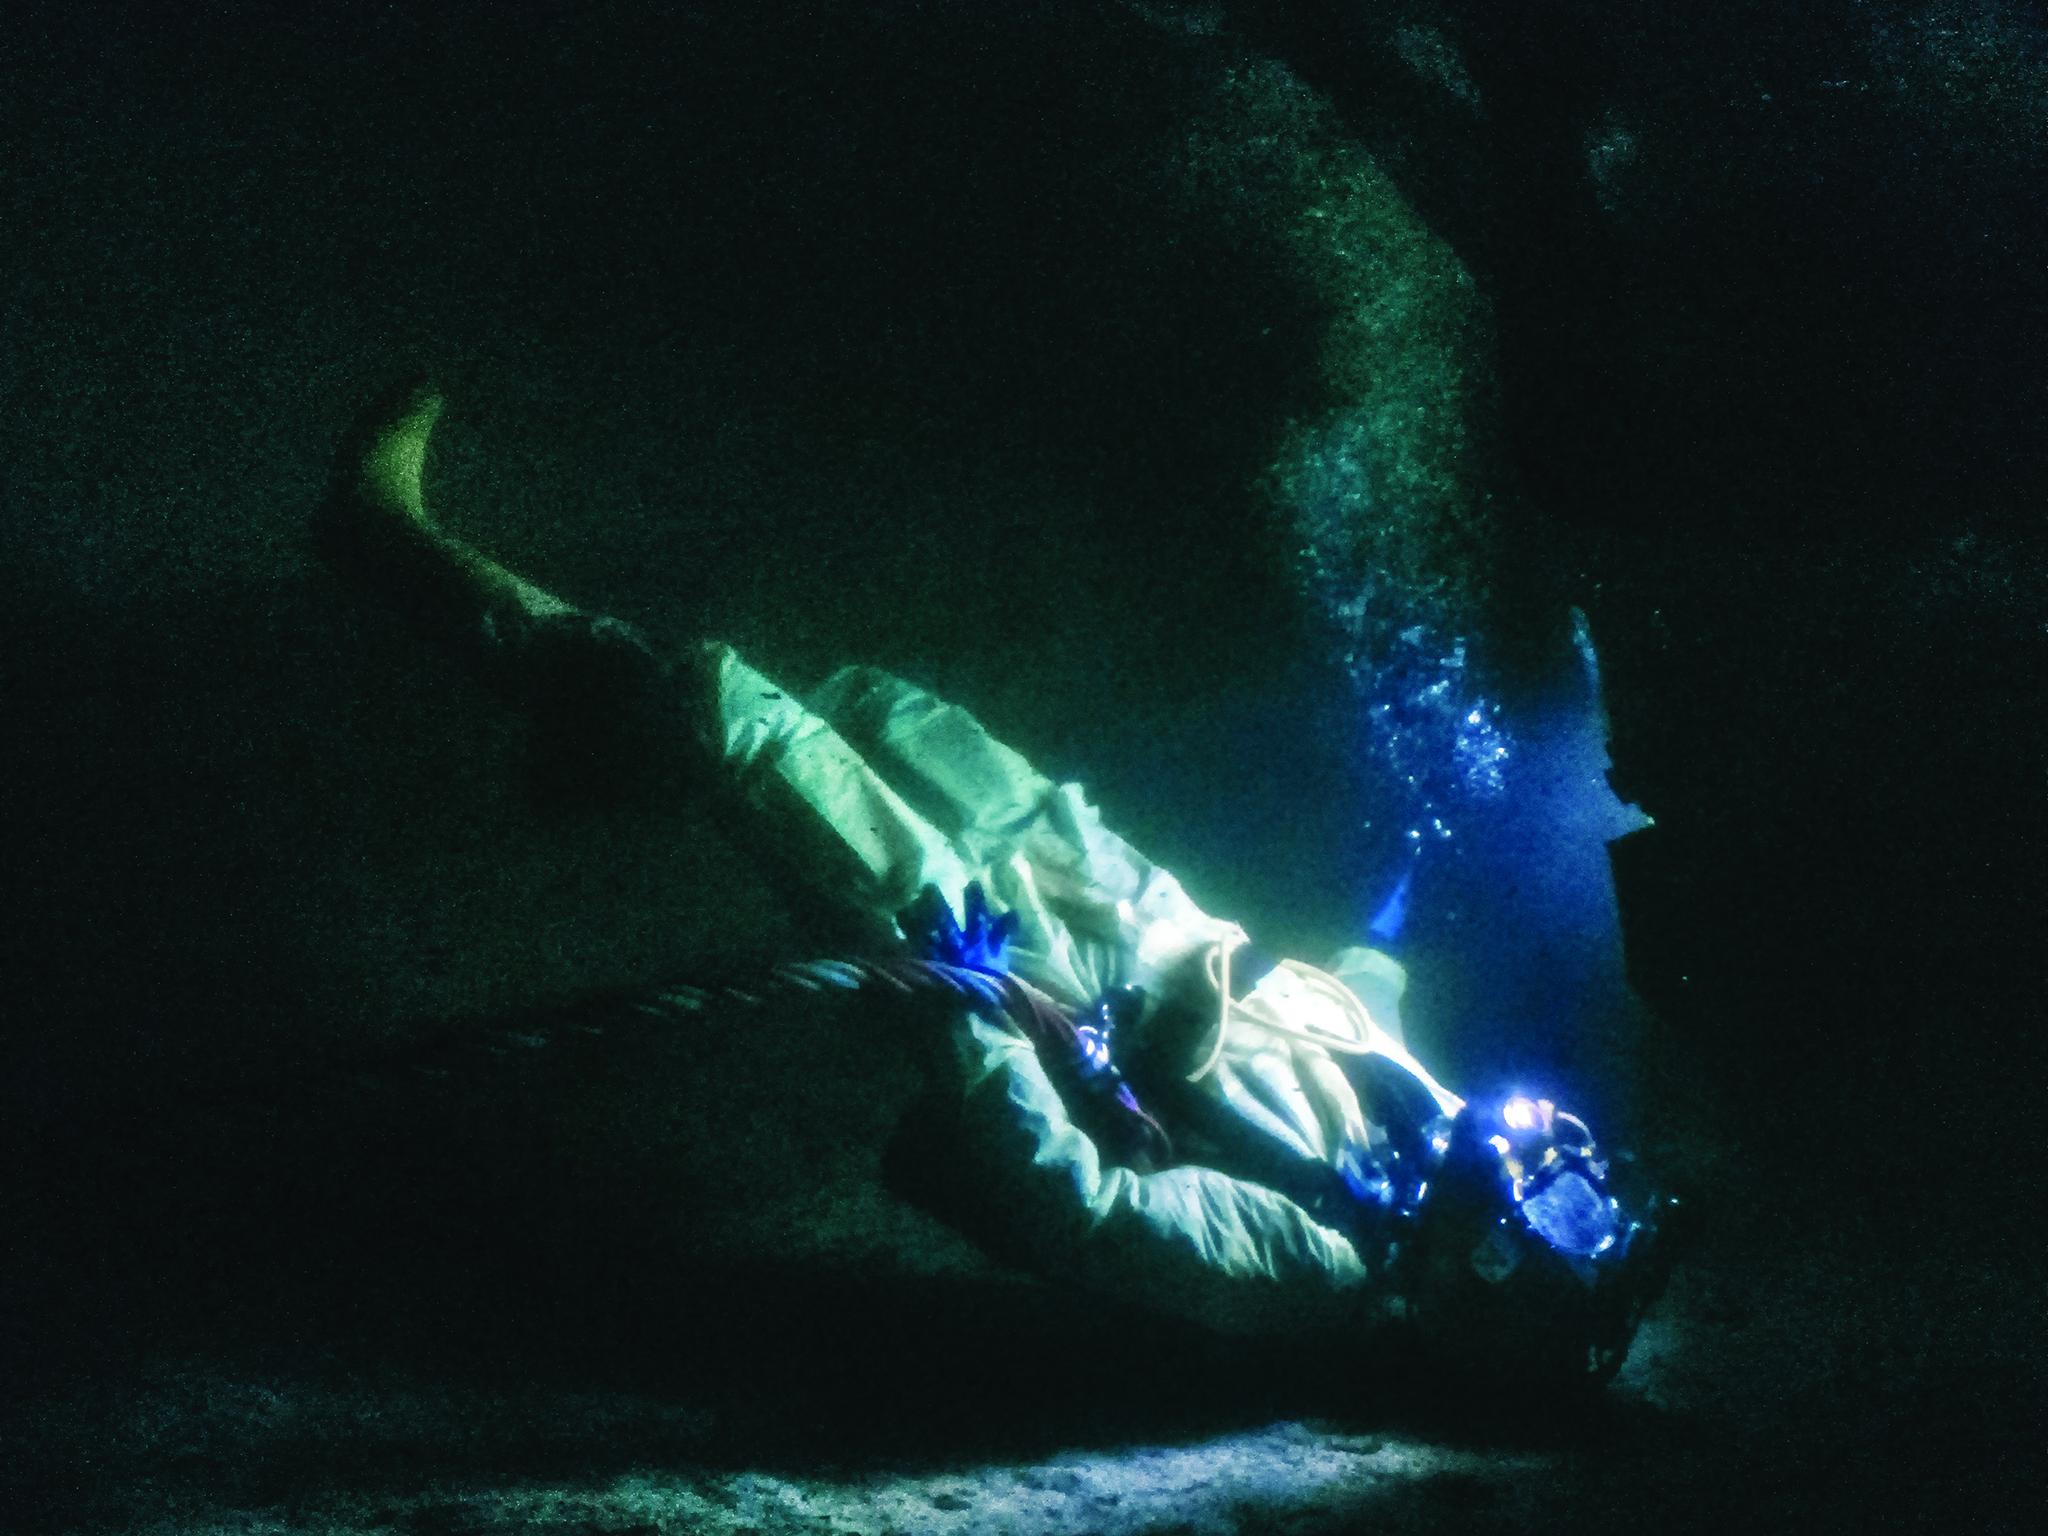 Diving for dear life: a still from the film ‘Last Breath’, which follows the story of saturation diver Chris Lemons